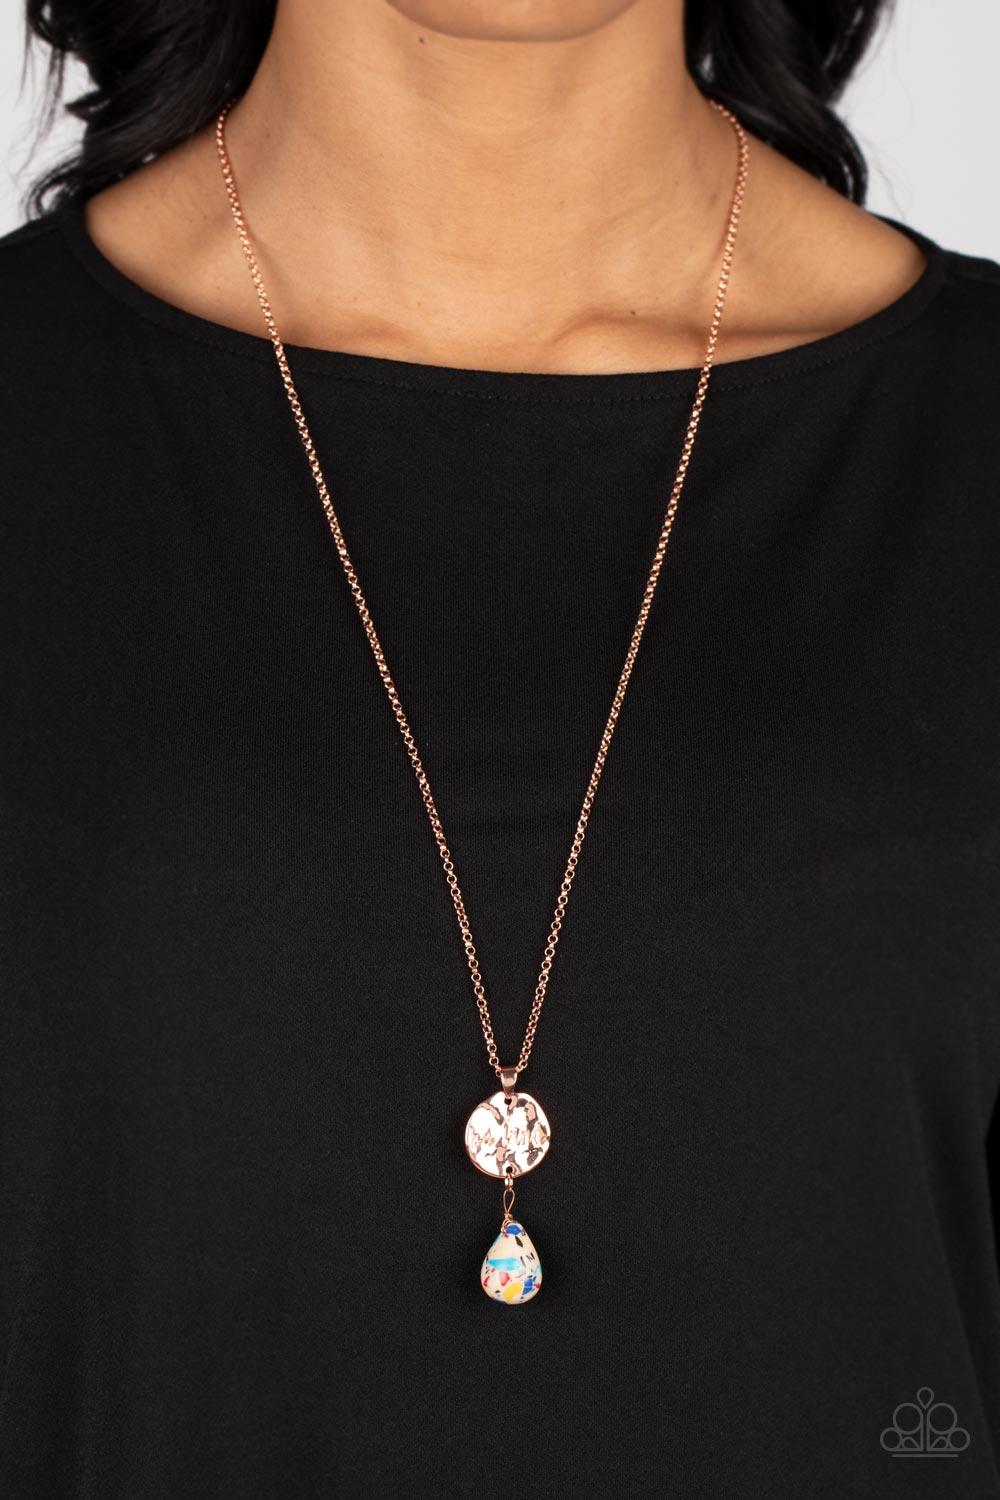 Paparazzi Accessories Caring Couture - Multi Swinging from a dainty shiny copper chain, a hammered disc in the same hue is stamped with the words "be kind." A chiseled stone teardrop painted with multicolored flecks hangs from the bottom of the pendant ad